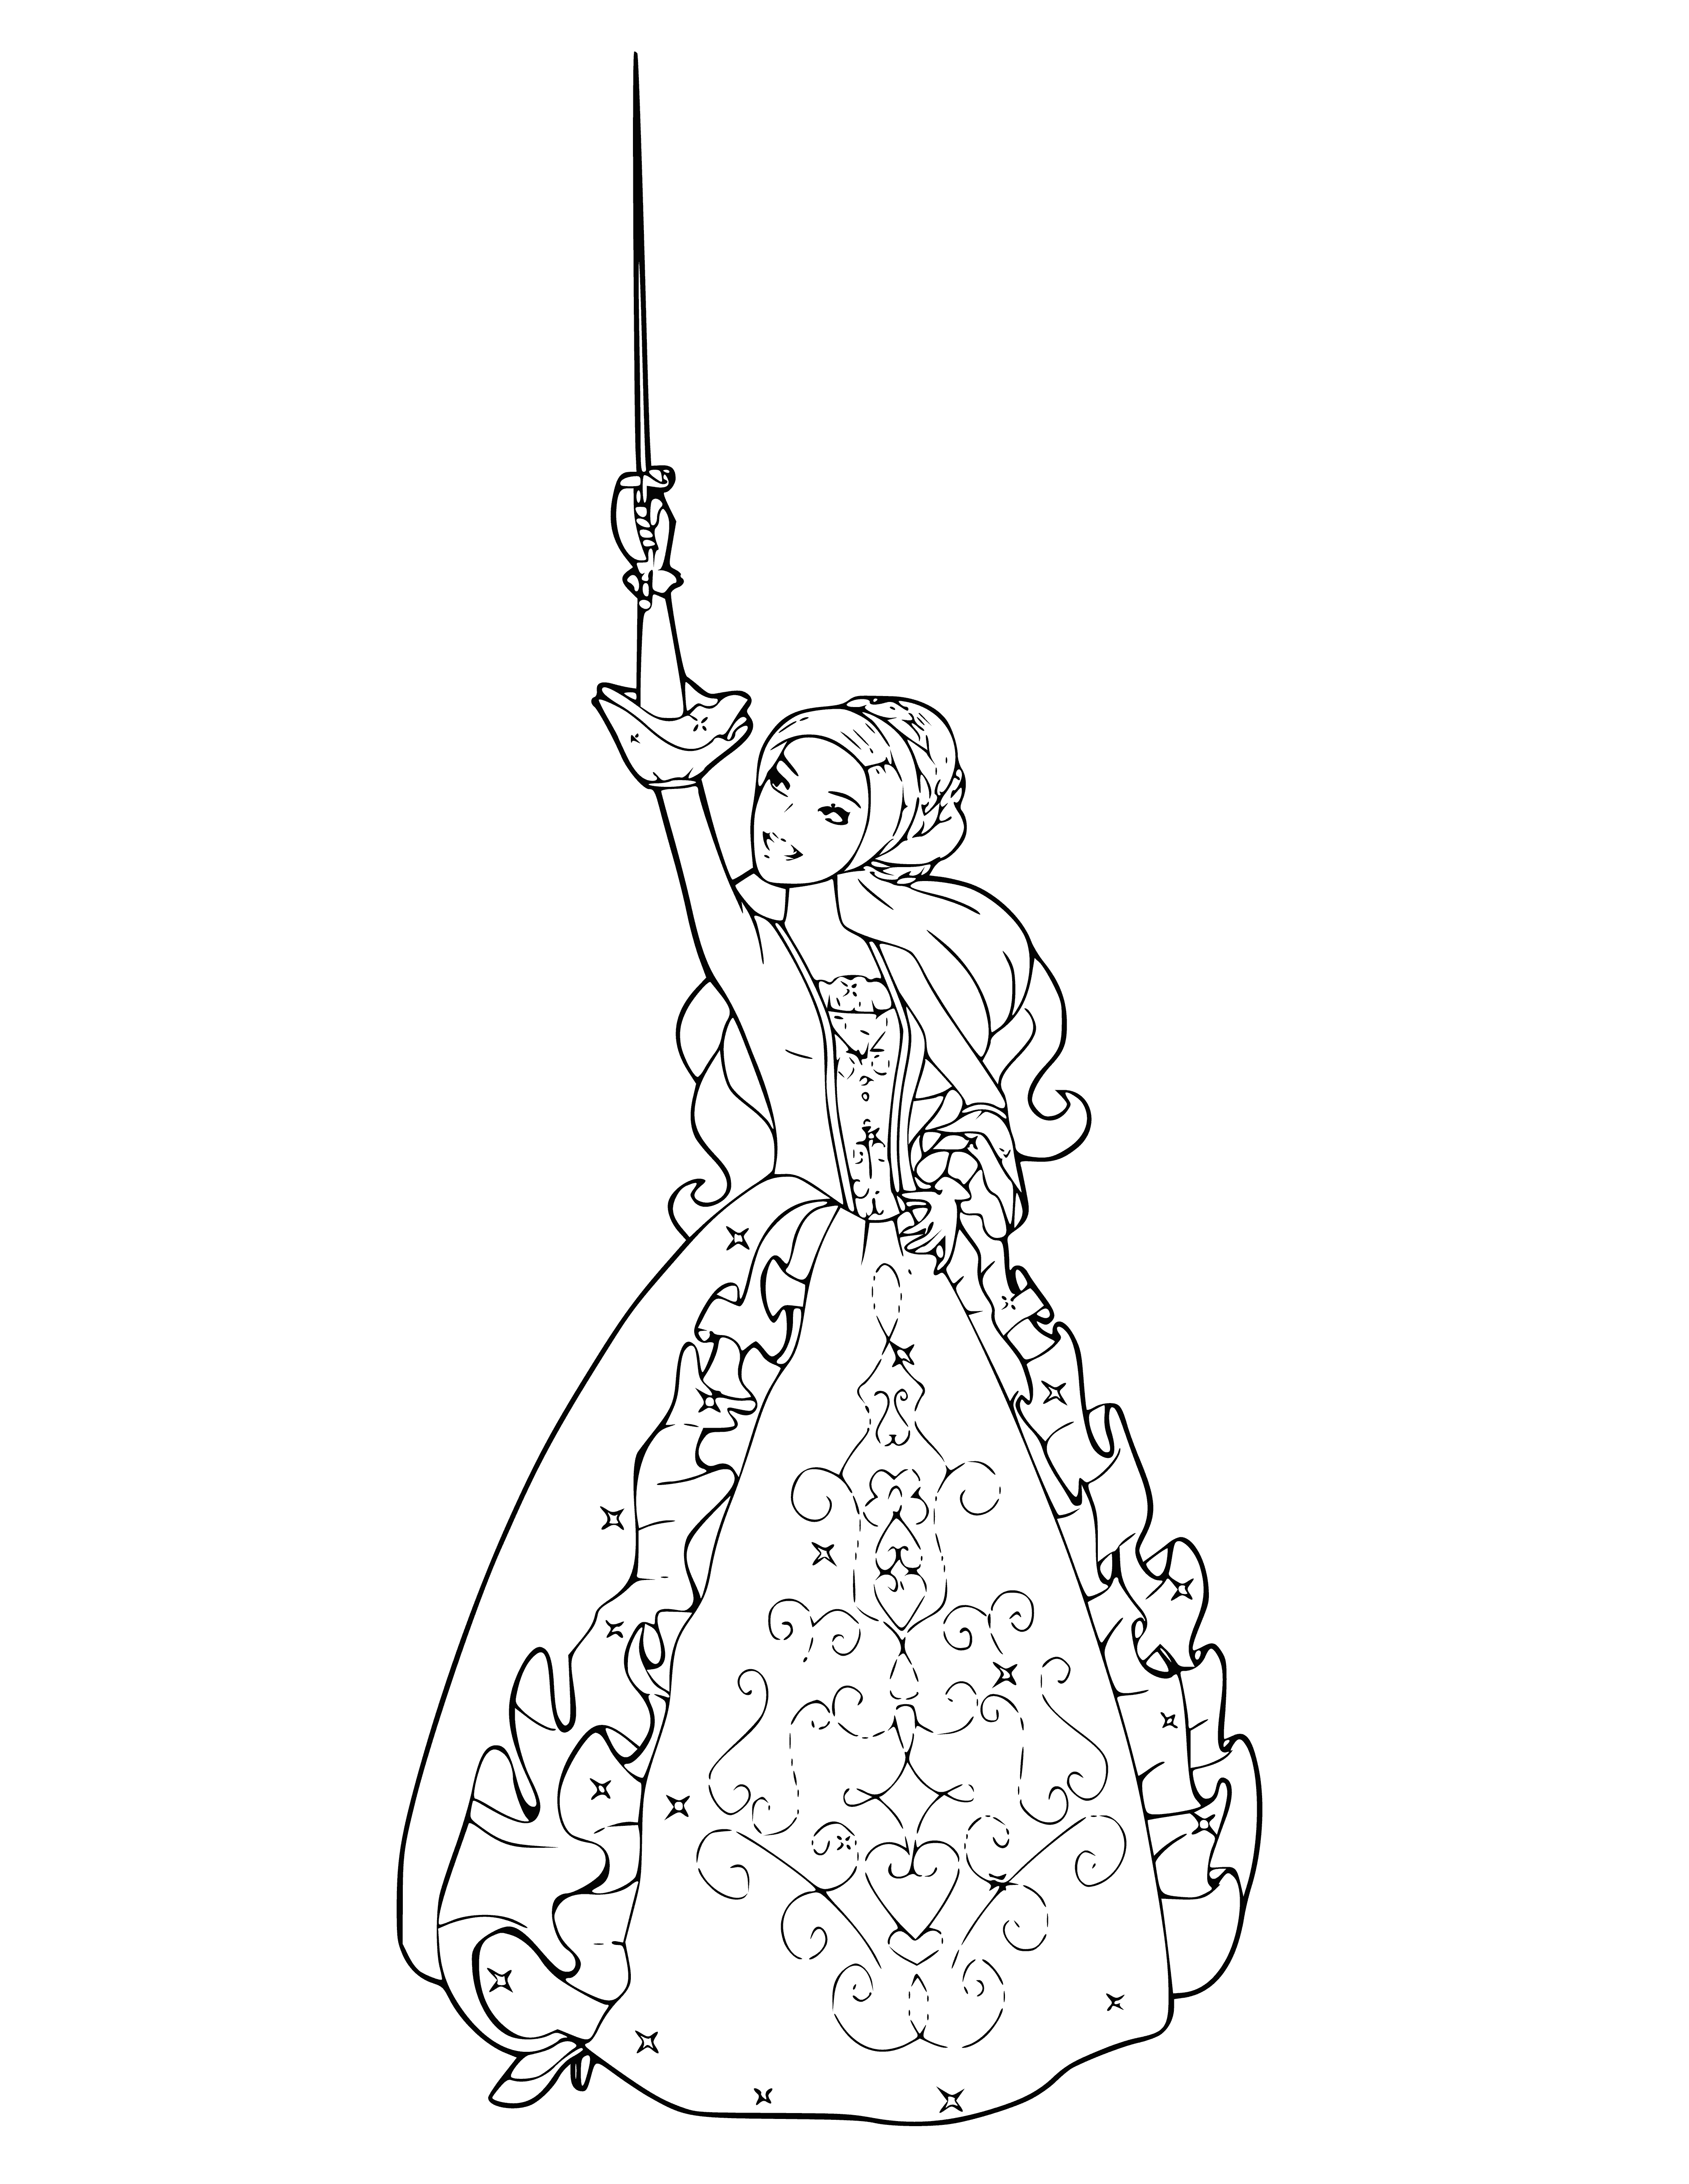 coloring page: Barbie as a musketeer, wearing sash and feathered hat, brandishes a sword. #BarbieDreams